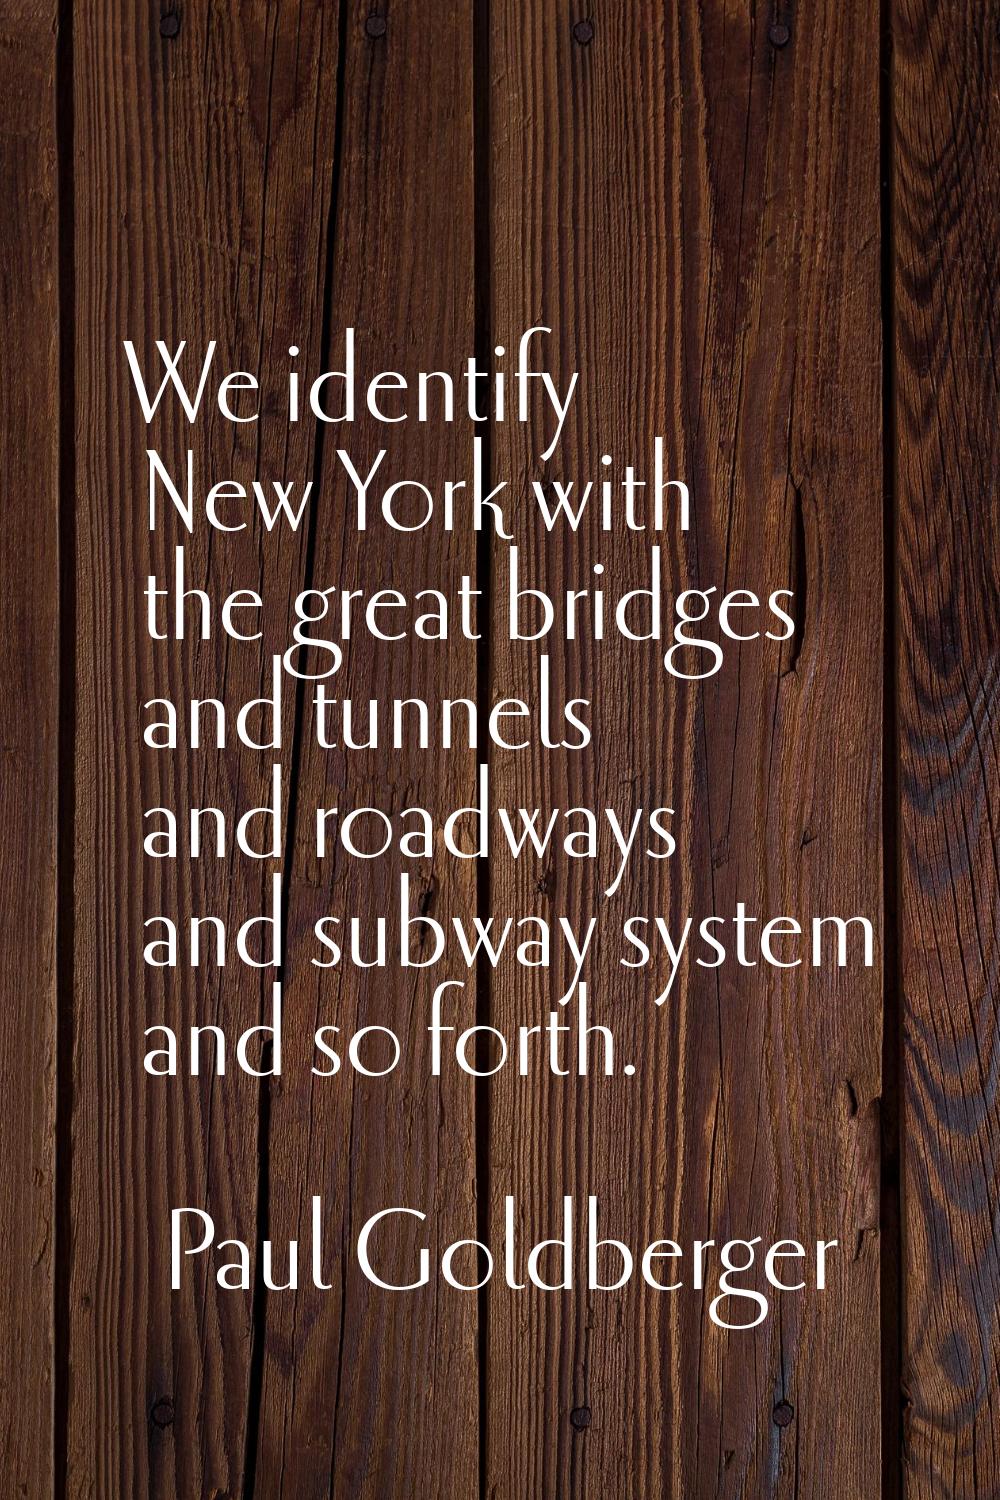 We identify New York with the great bridges and tunnels and roadways and subway system and so forth